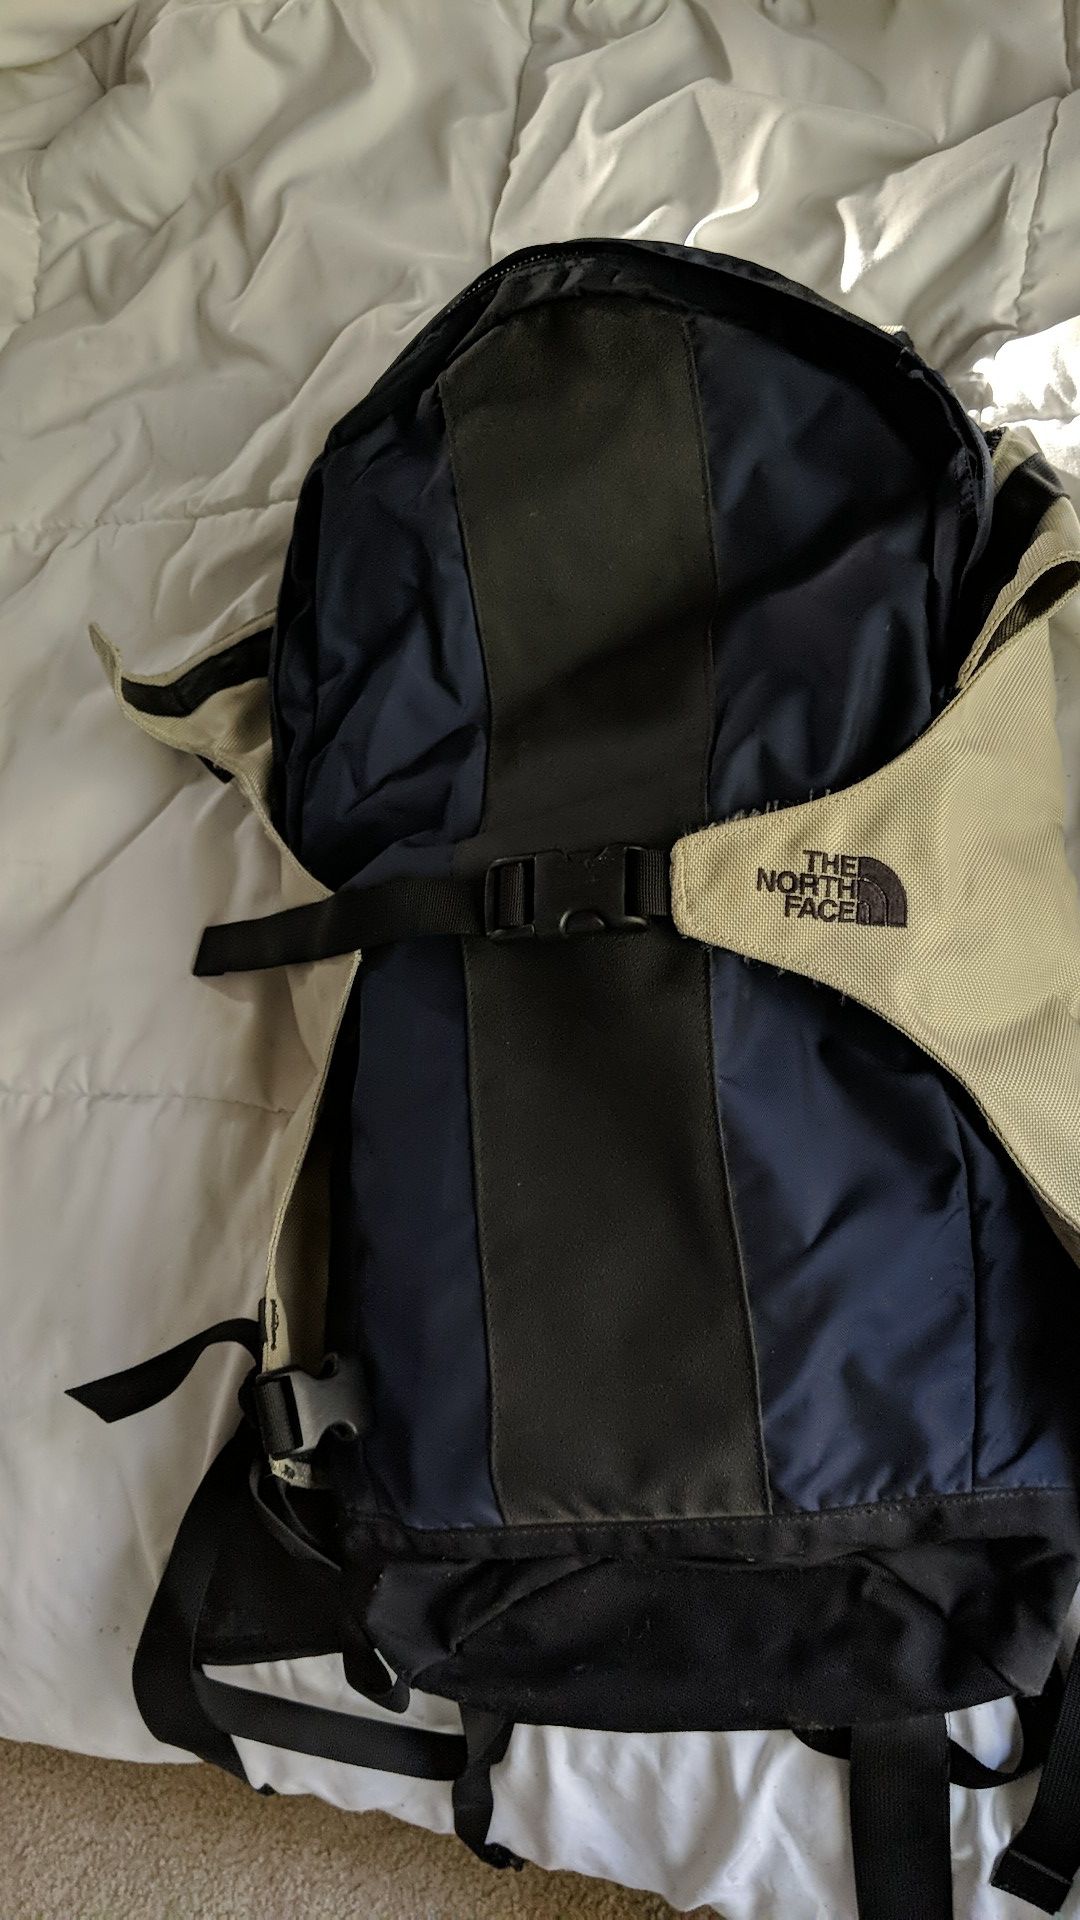 North face snowboarding backpack